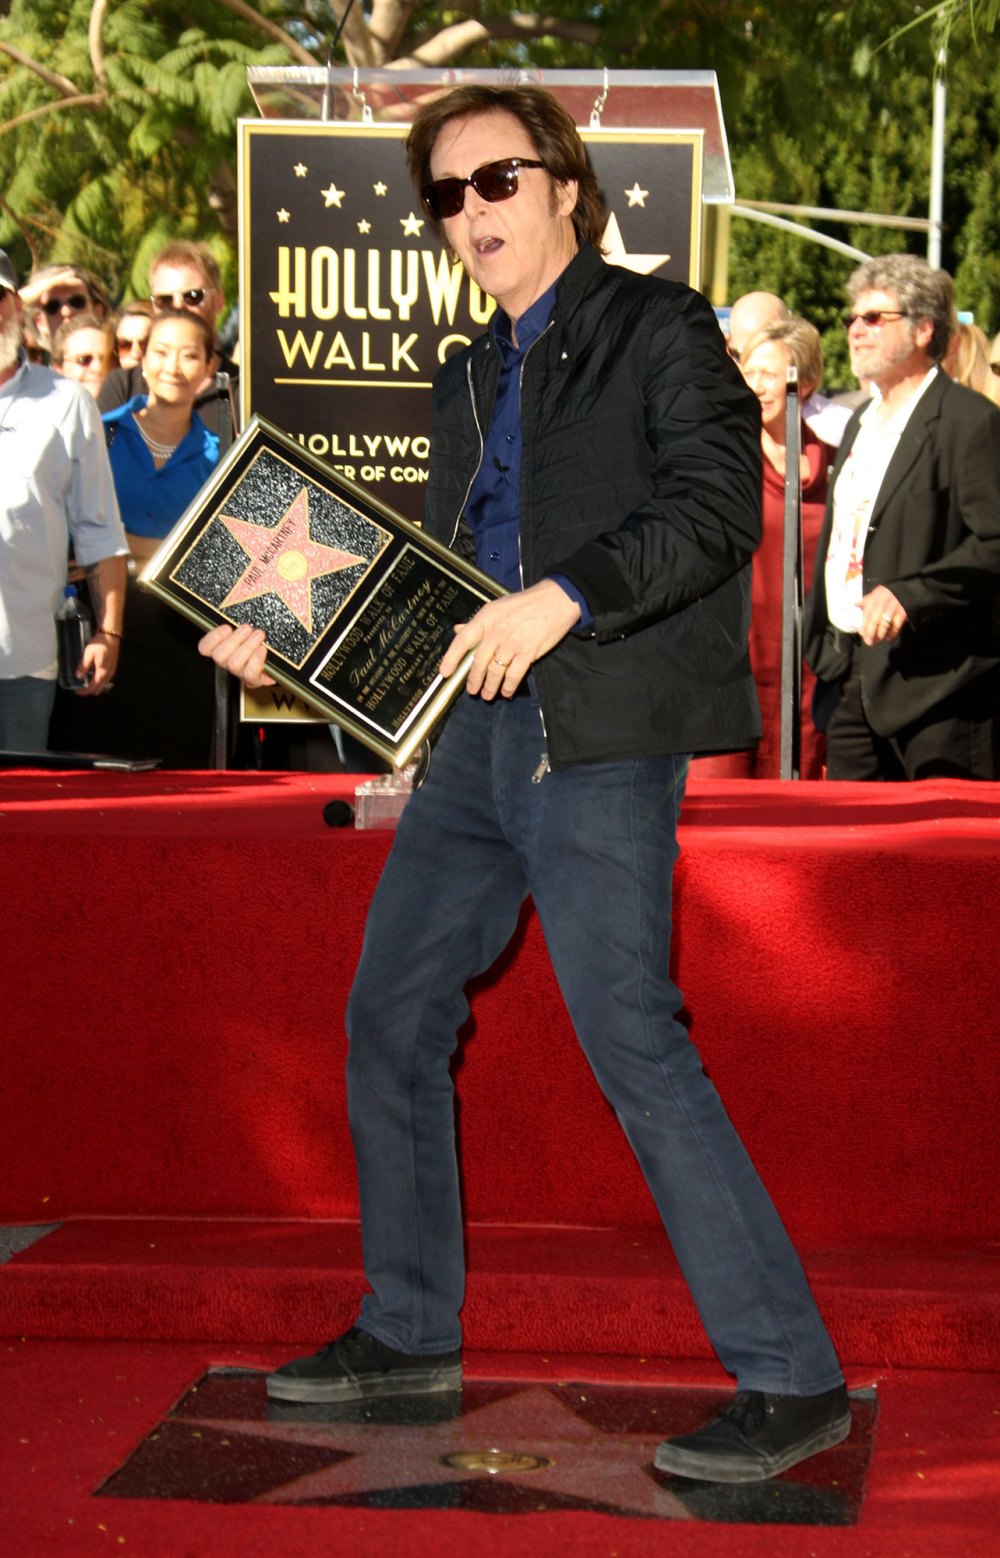 Paul McCartney Receives a Star on the Hollywood Walk of Fame